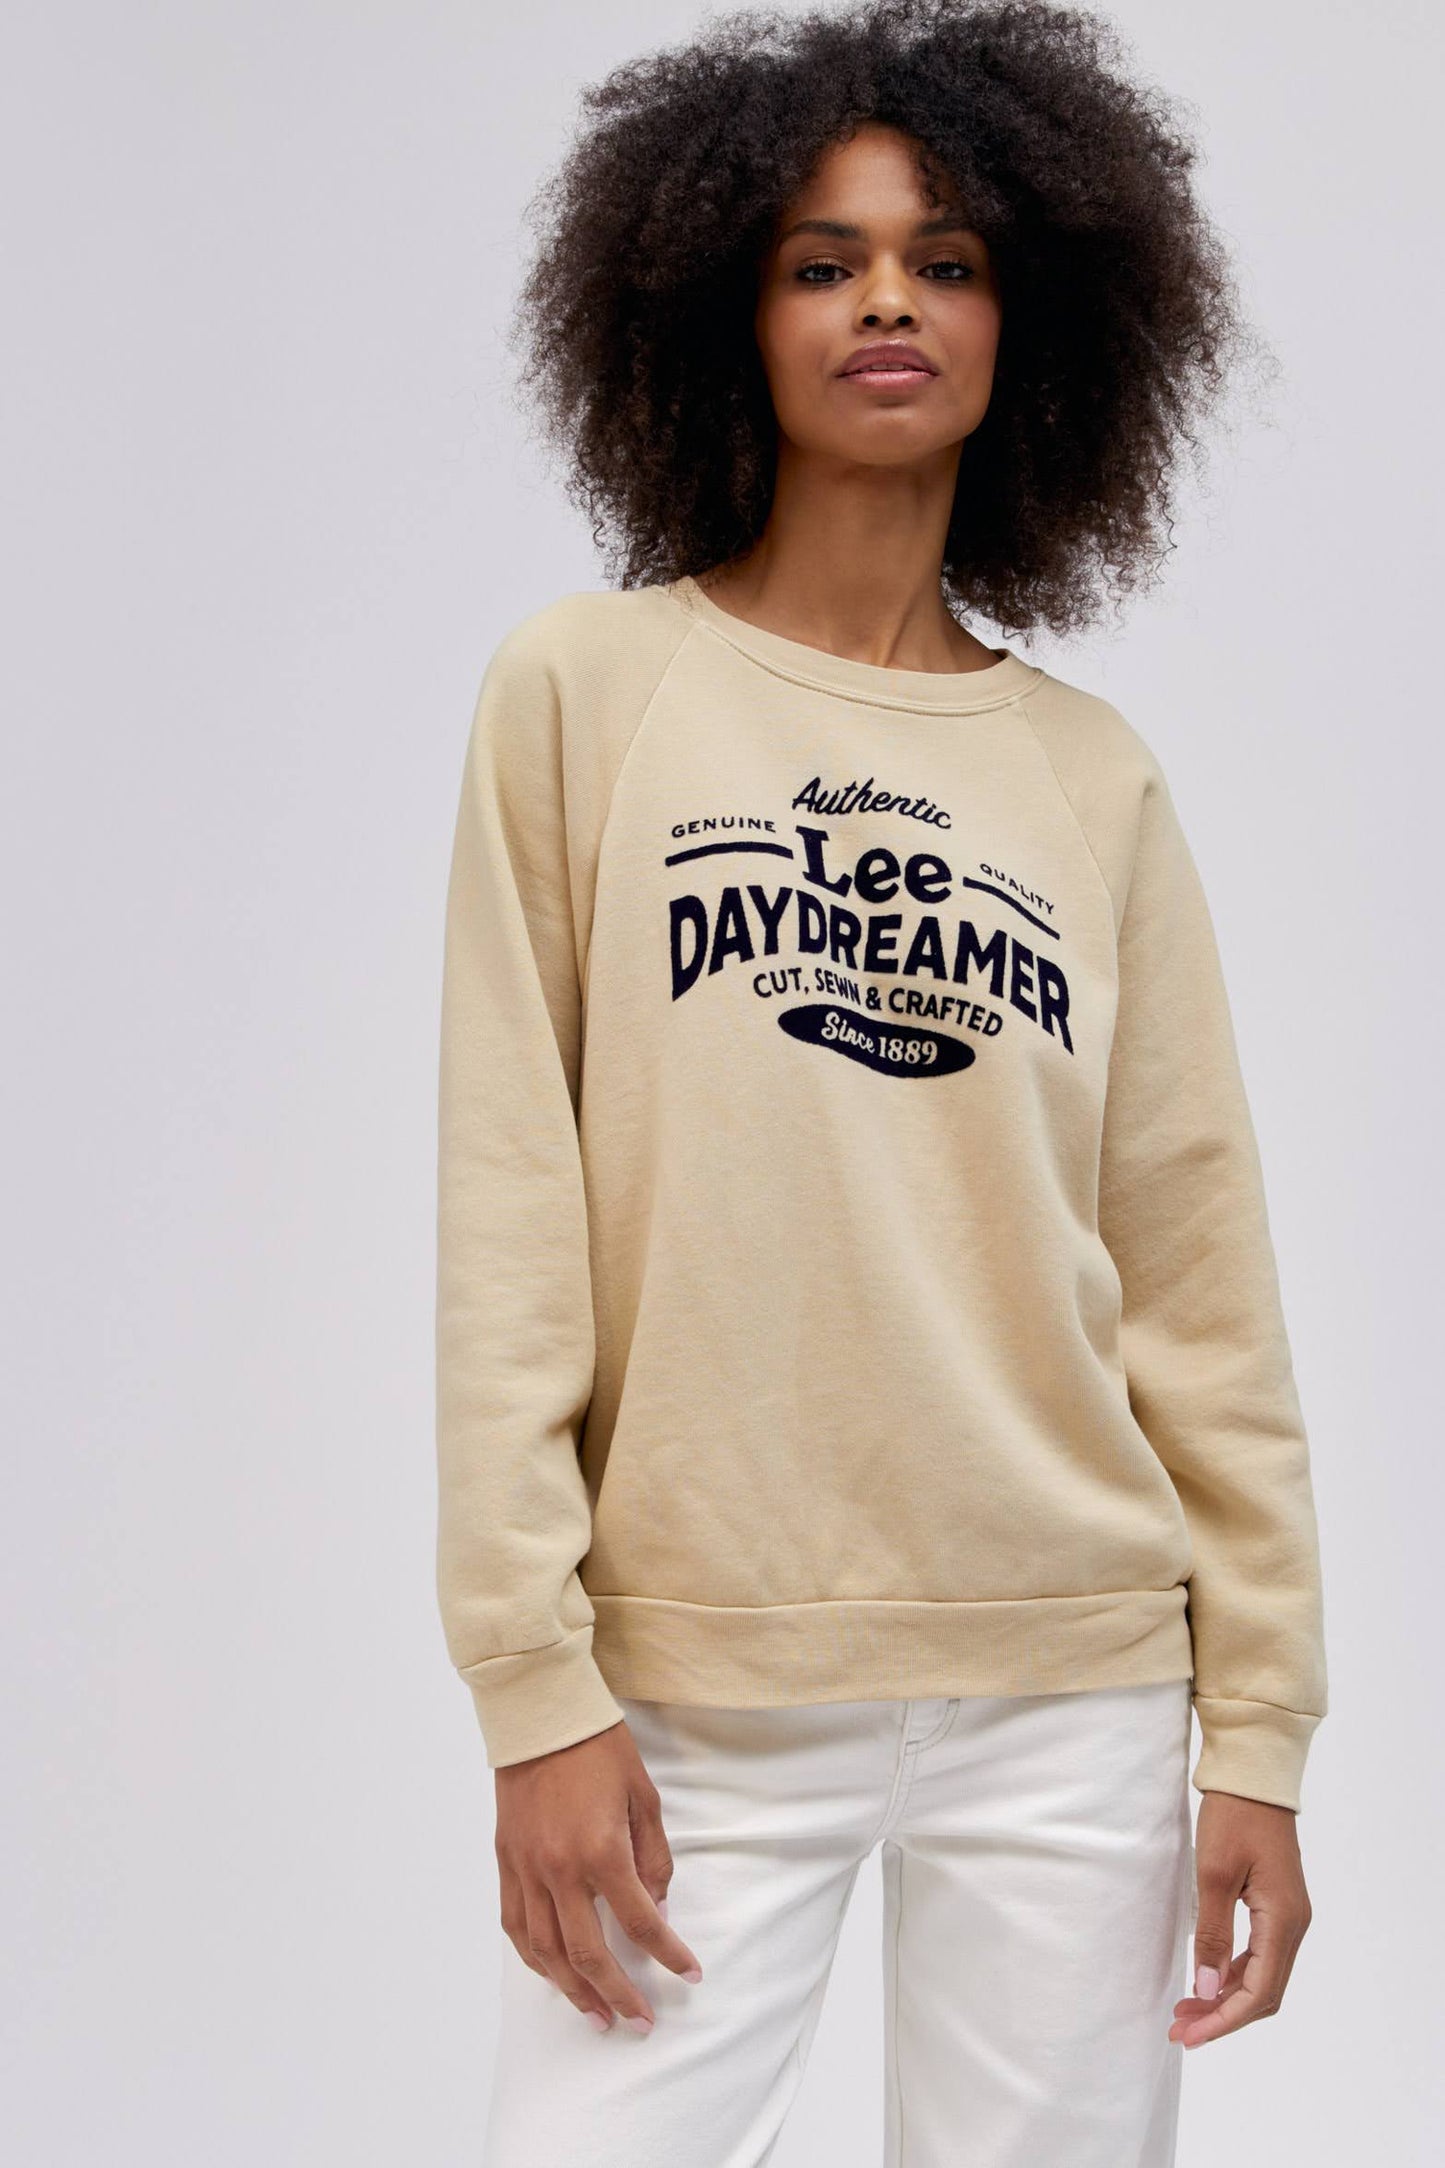 curly haired model wearing a khaki colored sweatshirt